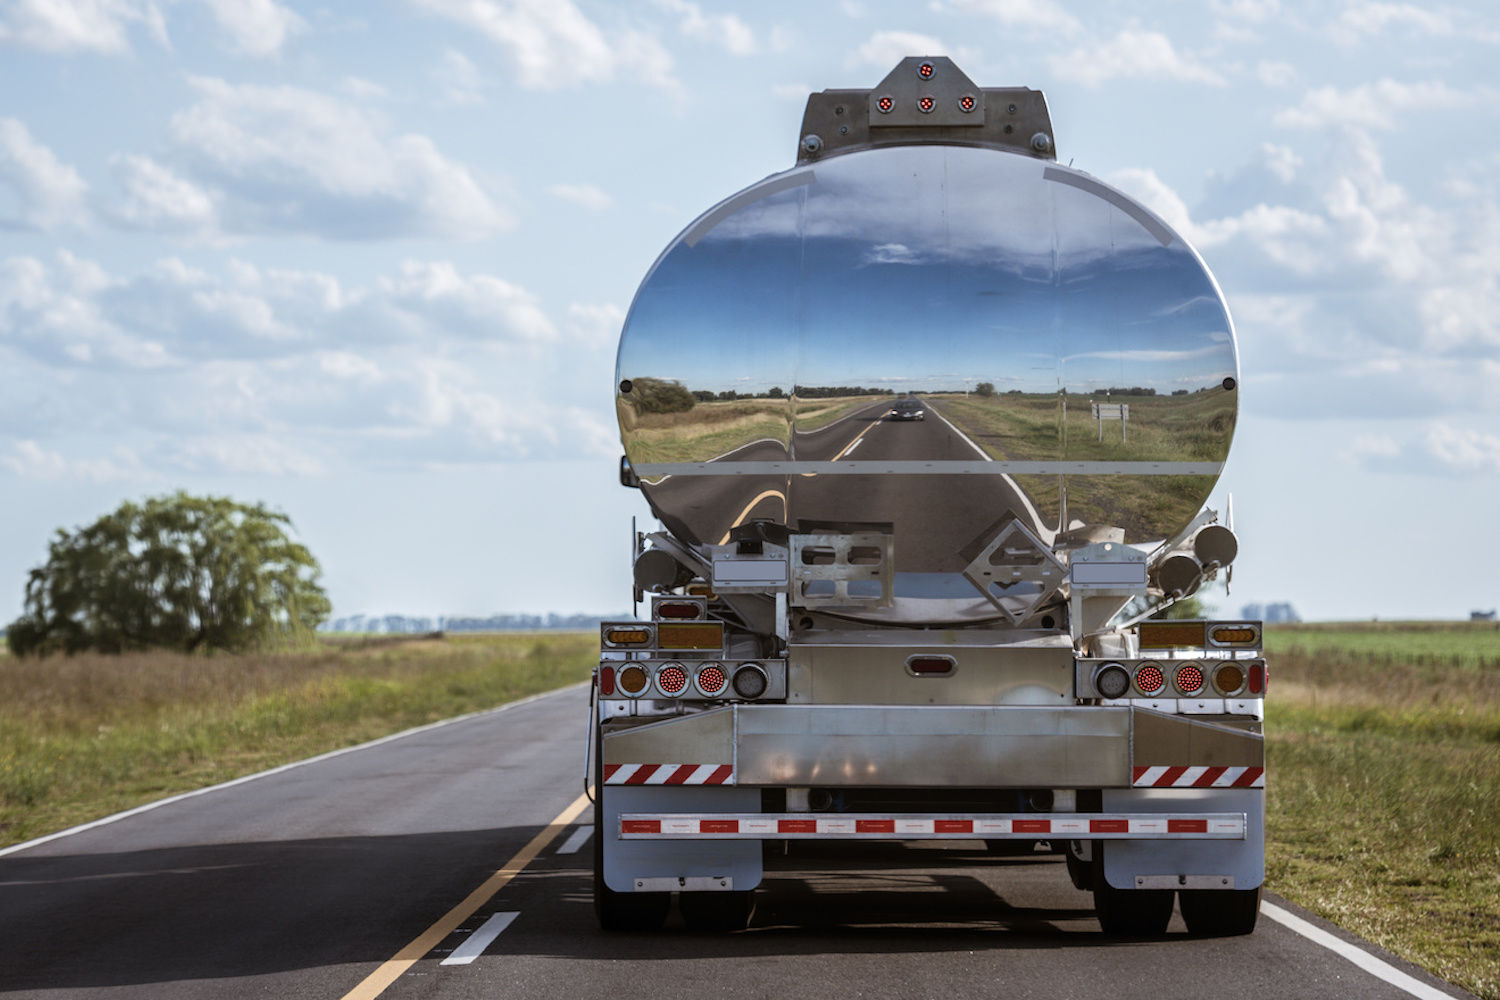 A truck tank of gasoline with reflection on the road